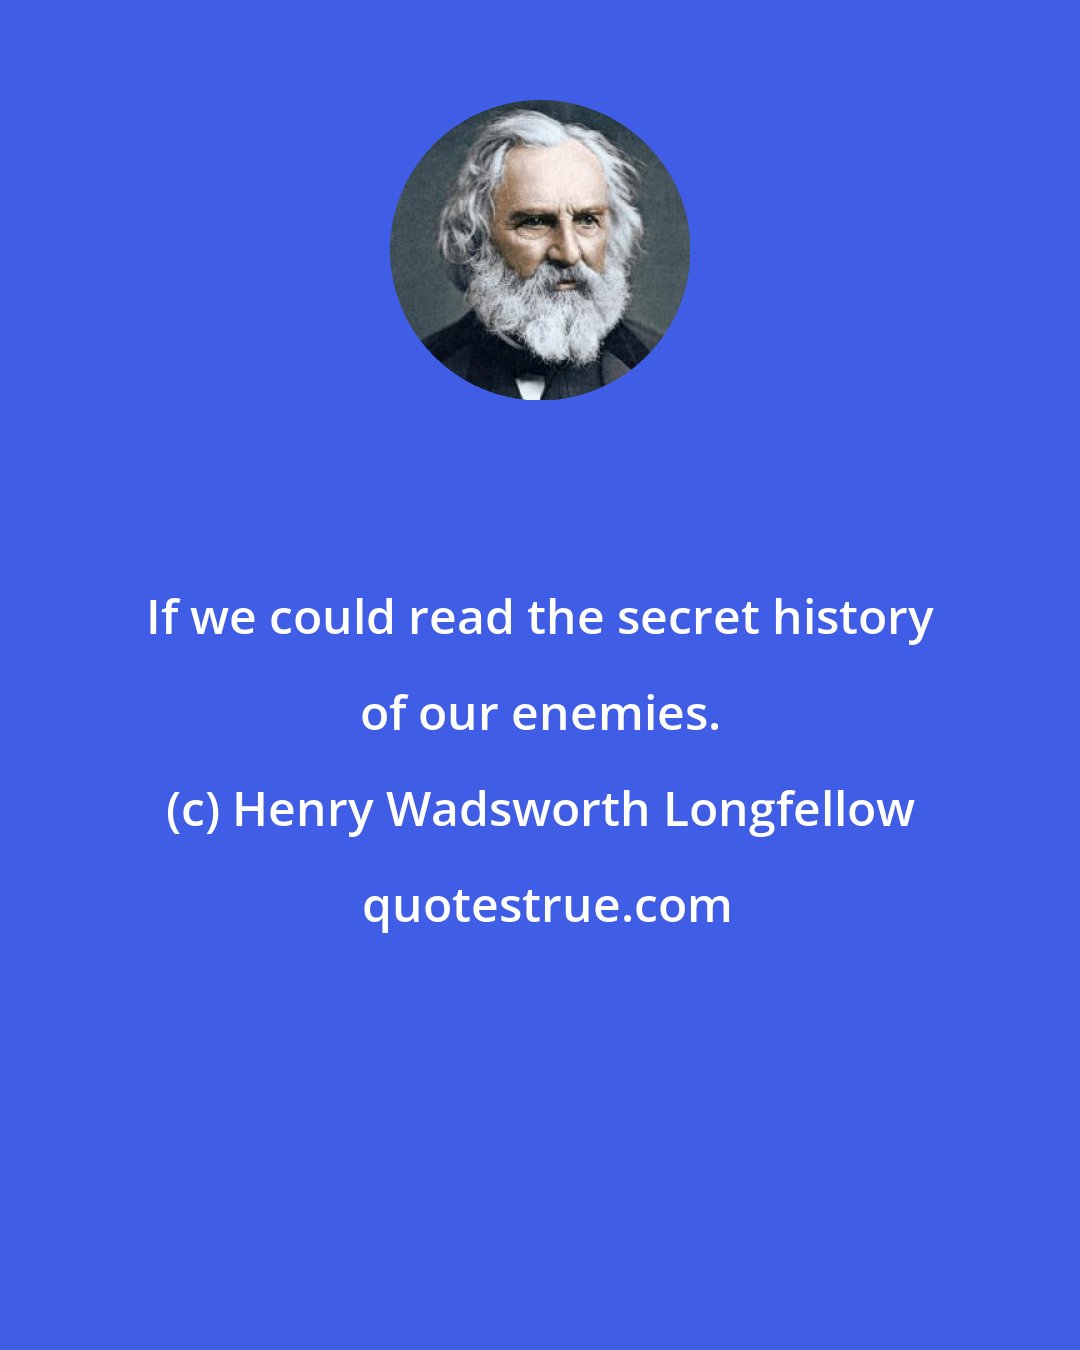 Henry Wadsworth Longfellow: If we could read the secret history of our enemies.